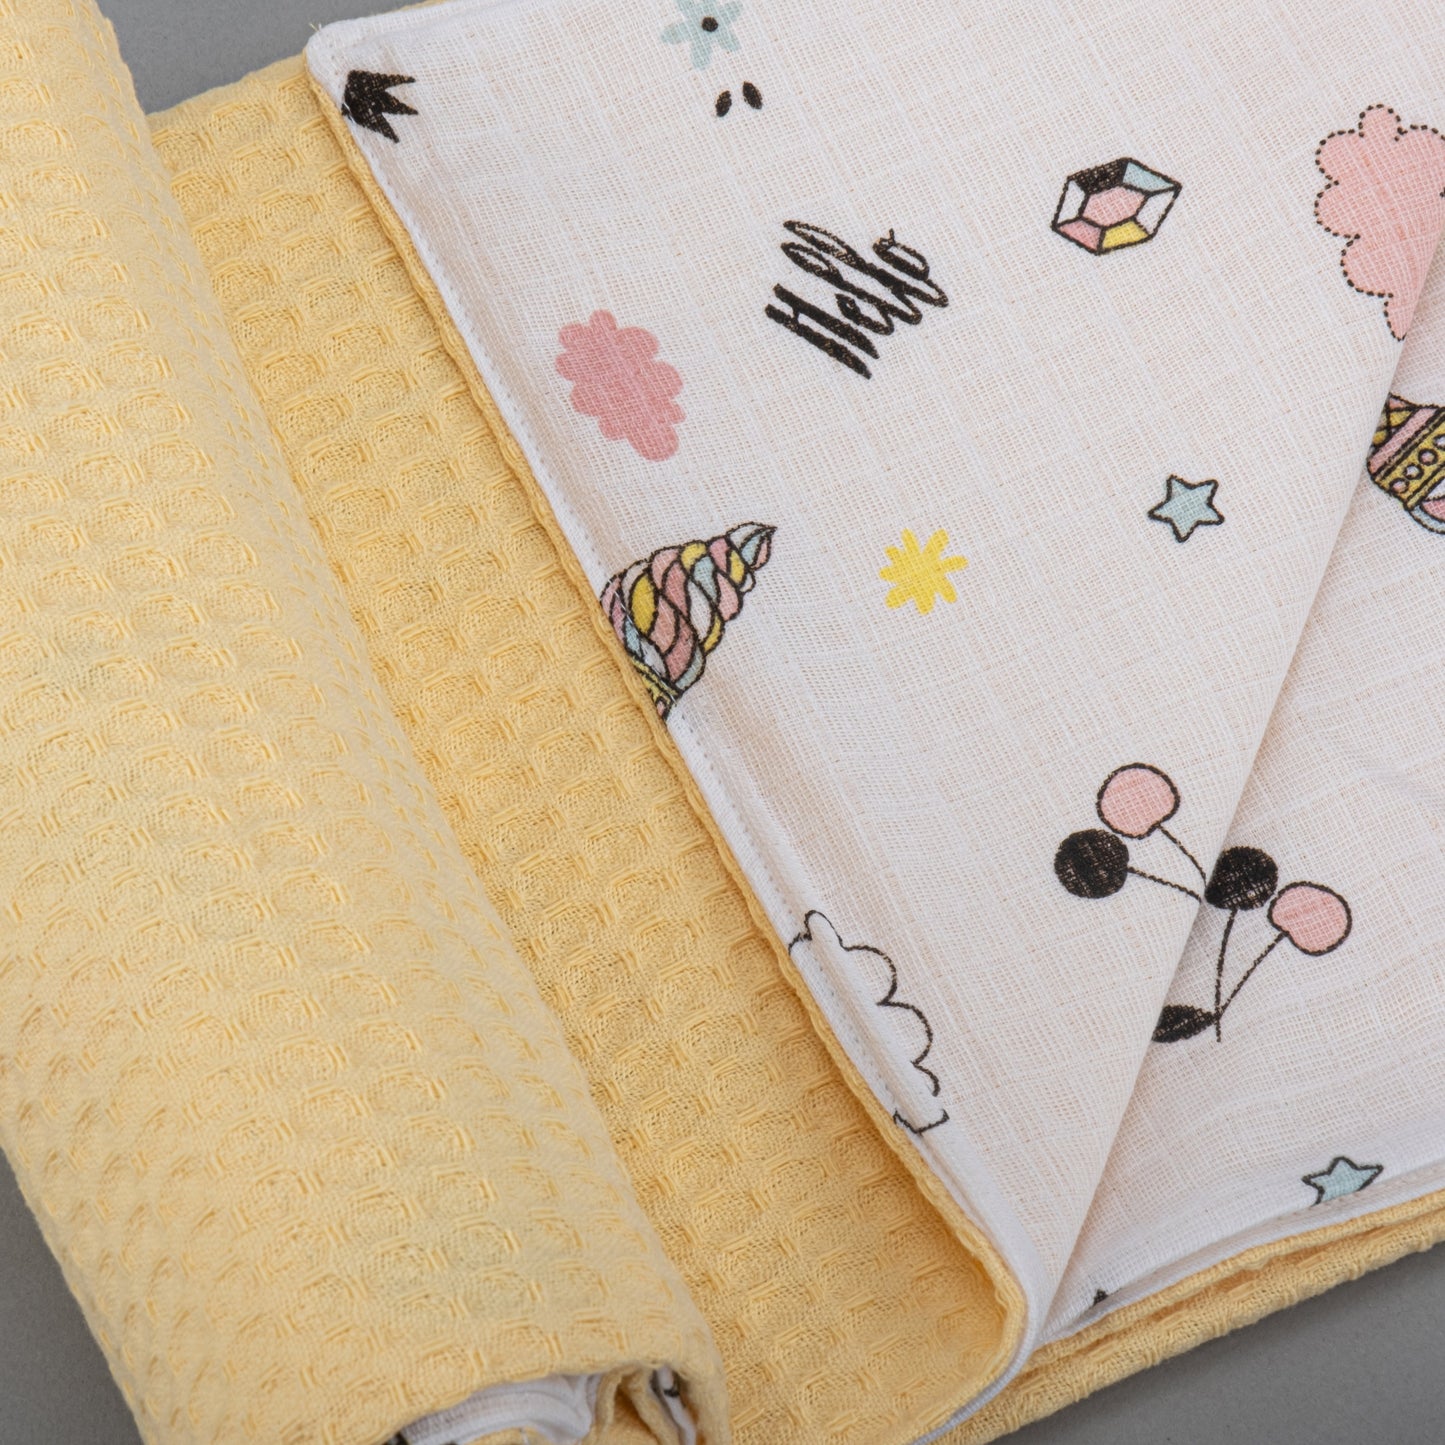 Pique Blanket - Double Side - Yellow Honeycomb - Flying Hearts